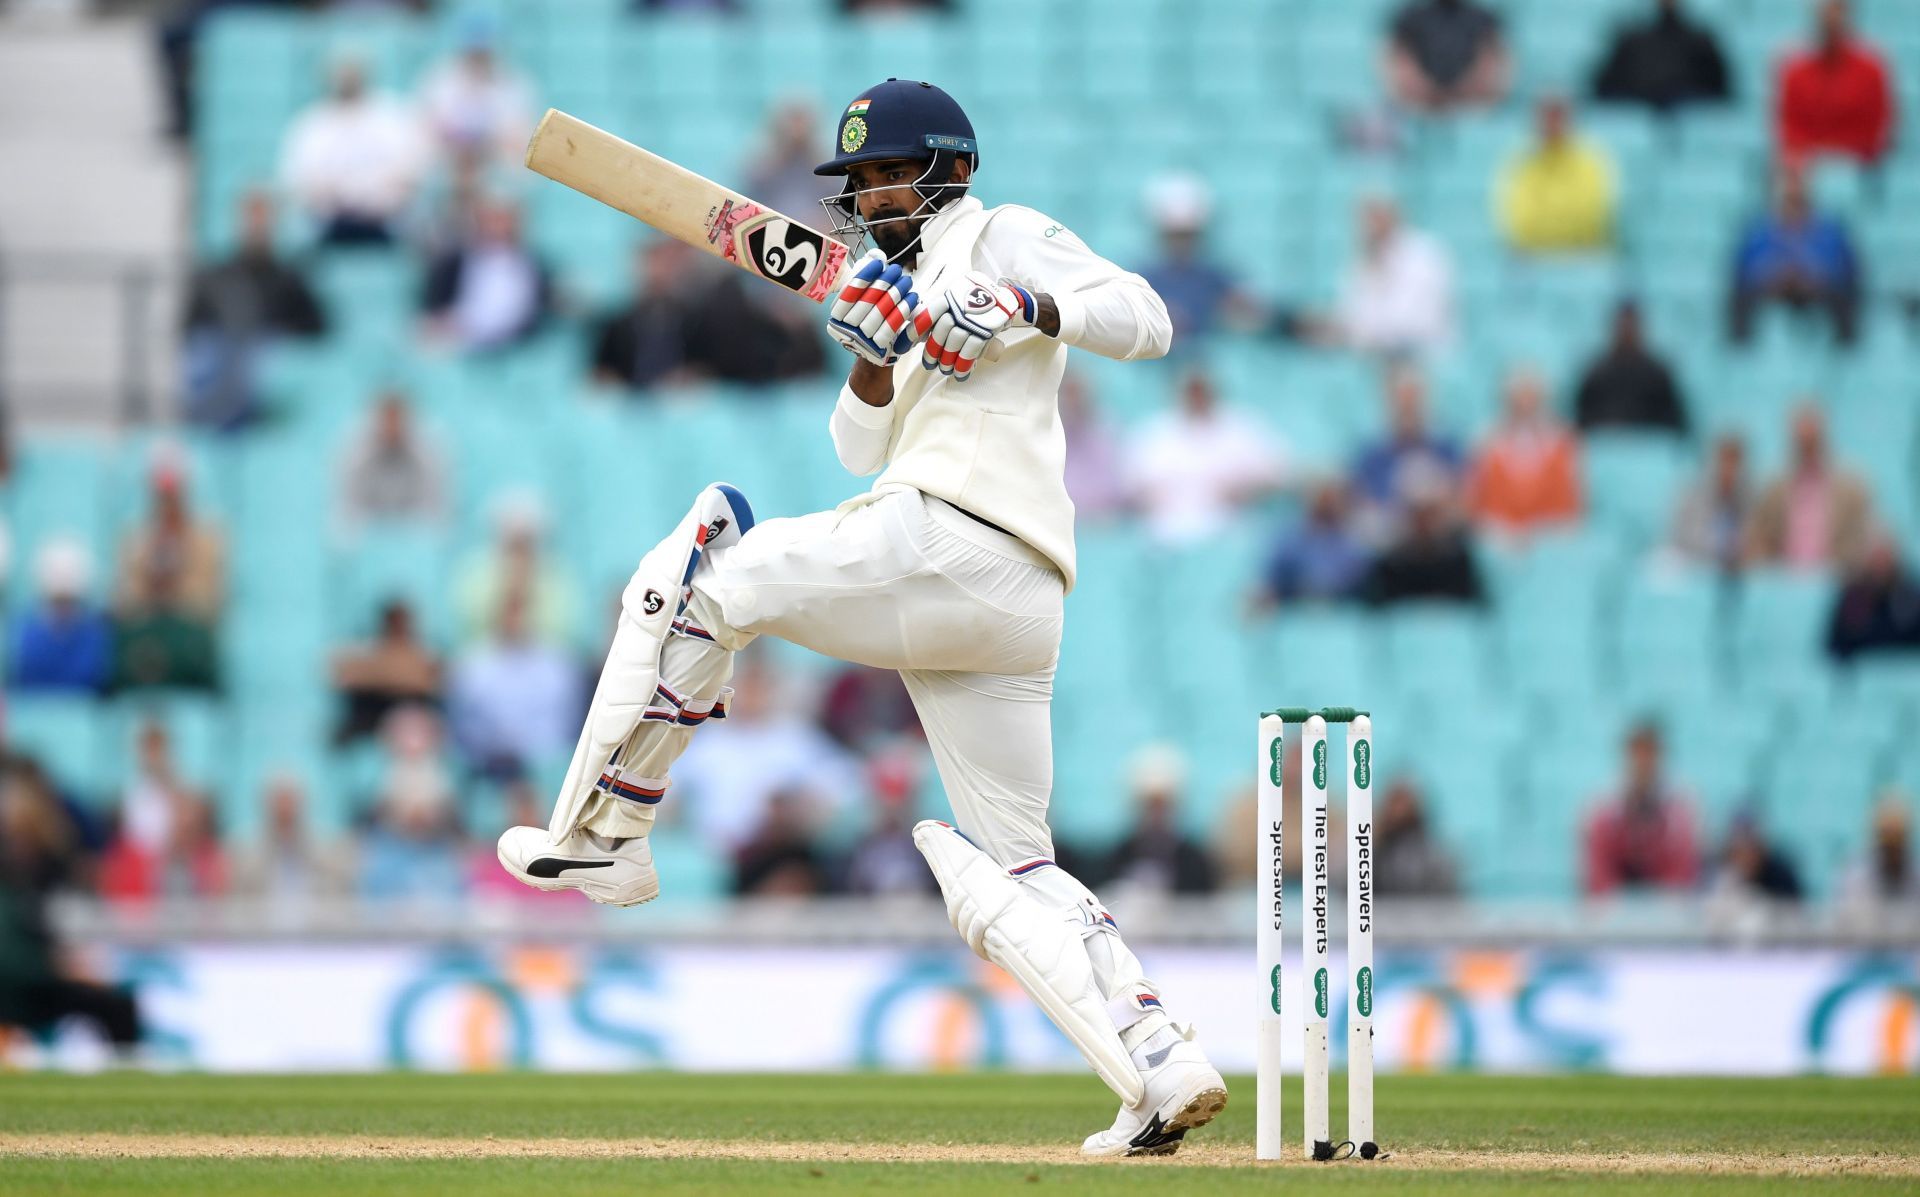 England vs India: Specsavers 5th Test - Day Five (Image: Getty)